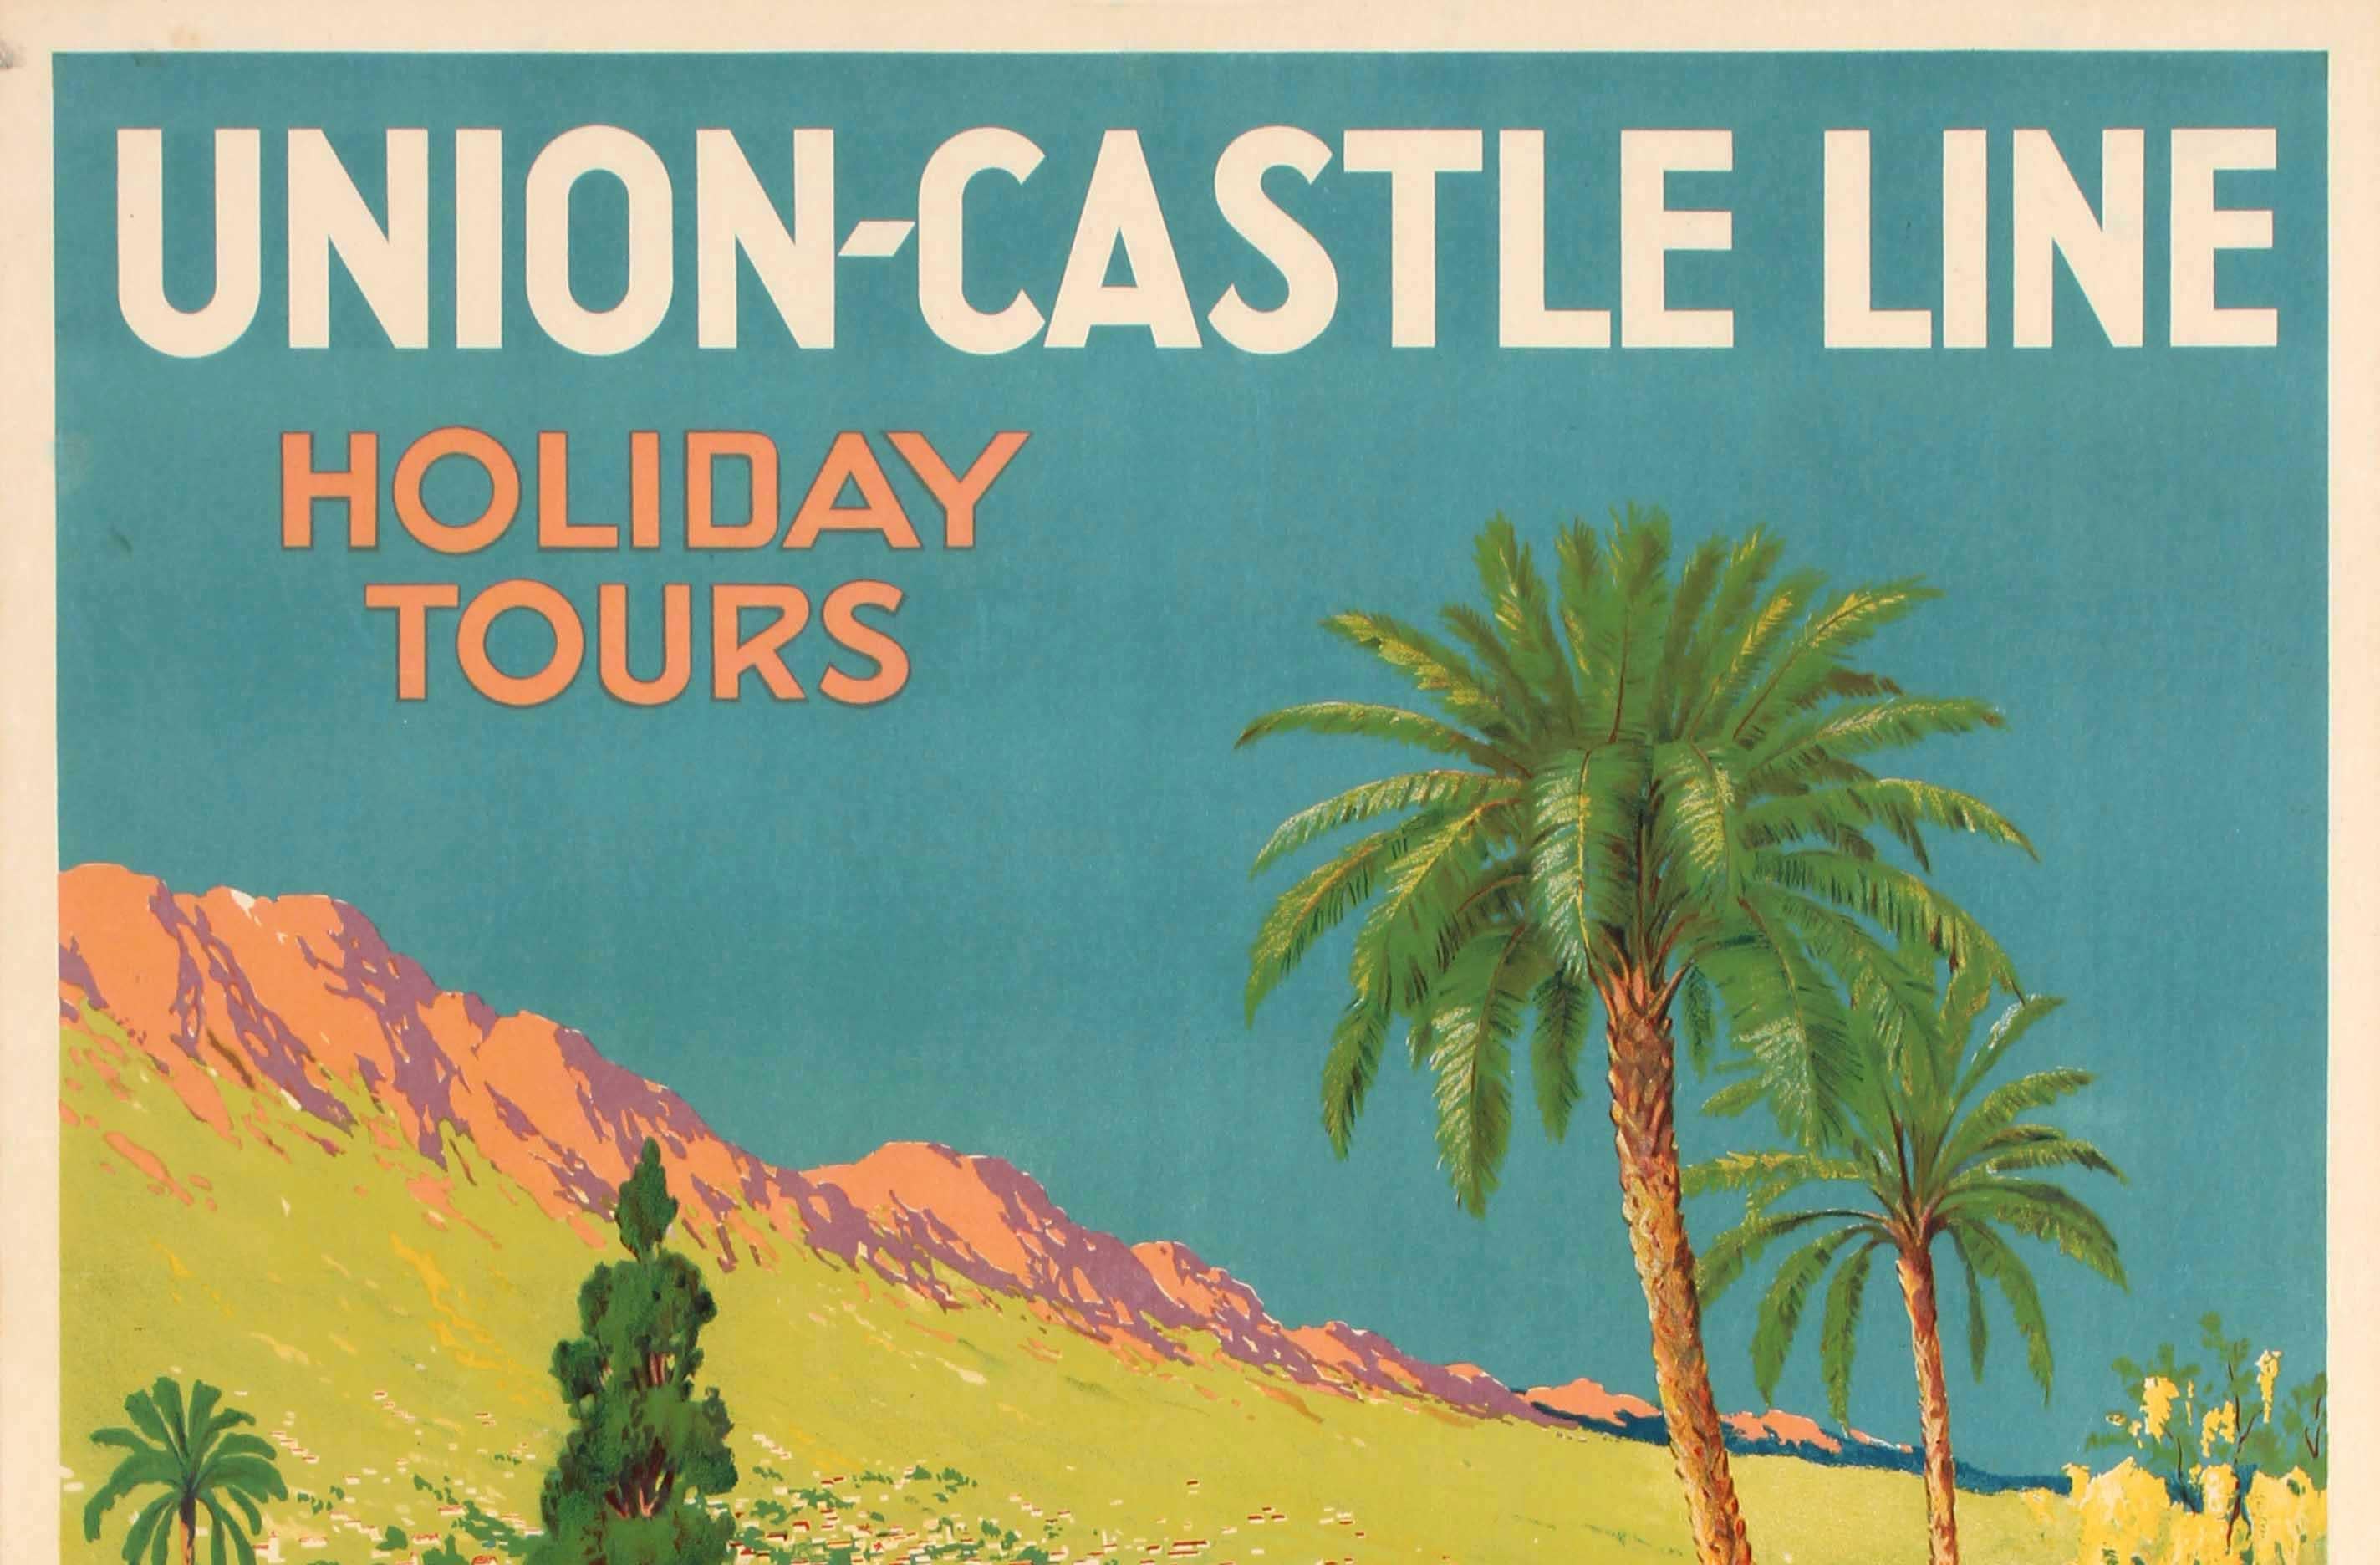 Original vintage cruise travel poster promoting Union Castle holiday tours reduced return fares to South Africa Madeira etc. Belgium Holland & Germany also Mediterranean. Bright and colourful scenic image depicting a Union-Castle line cruise ship on